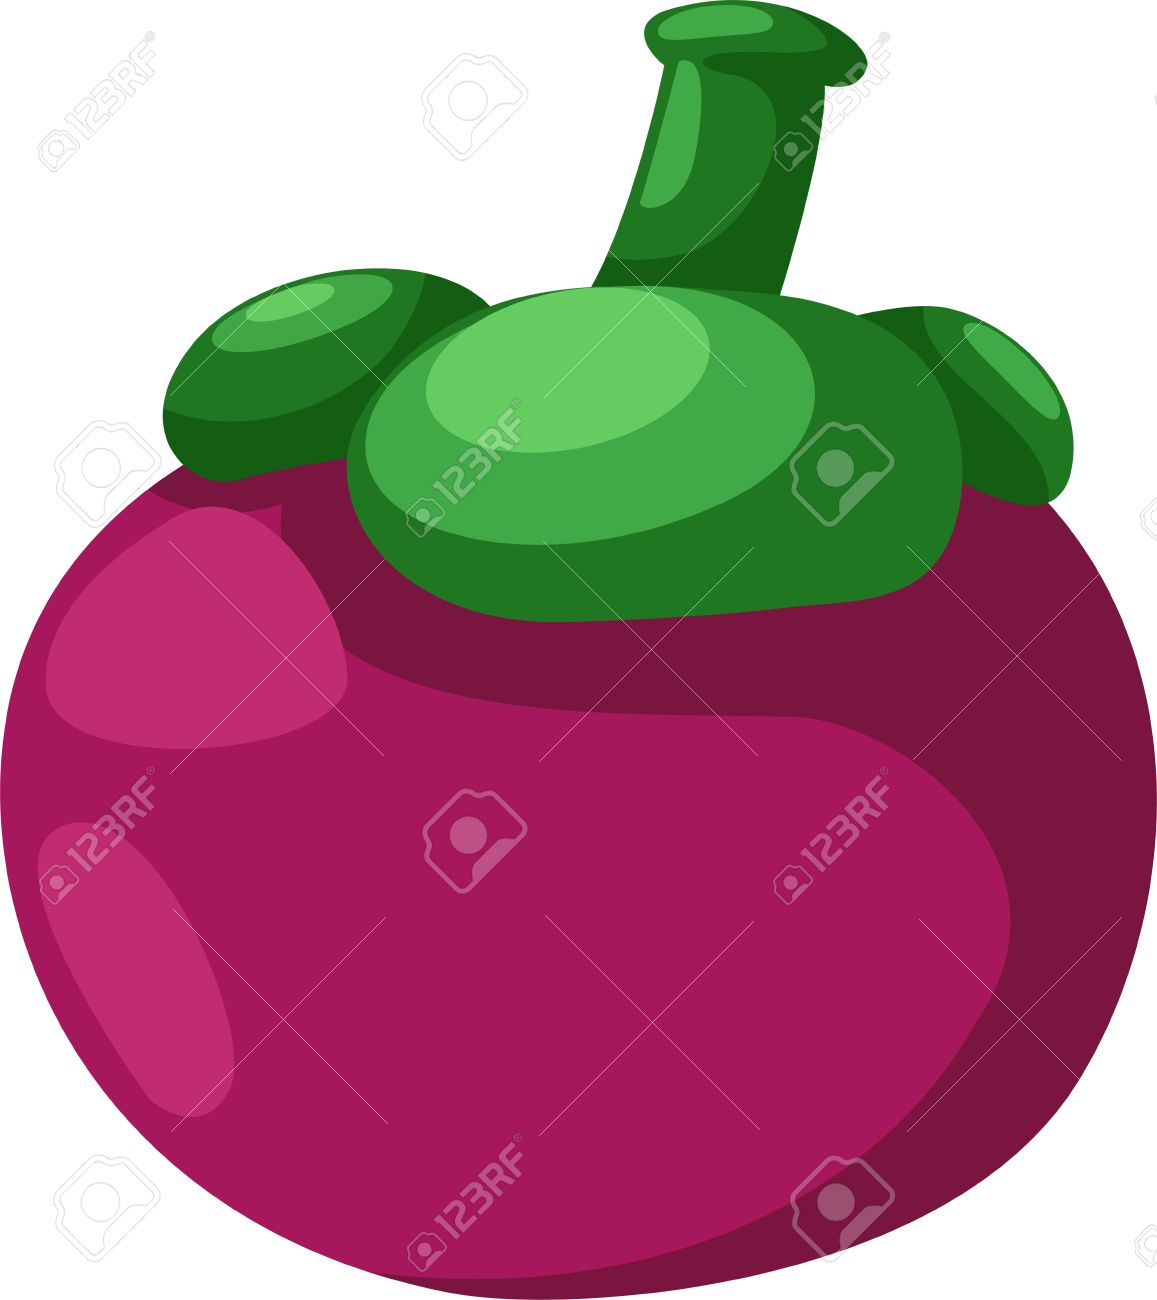 188 Purple Mangosteen Stock Vector Illustration And Royalty Free.